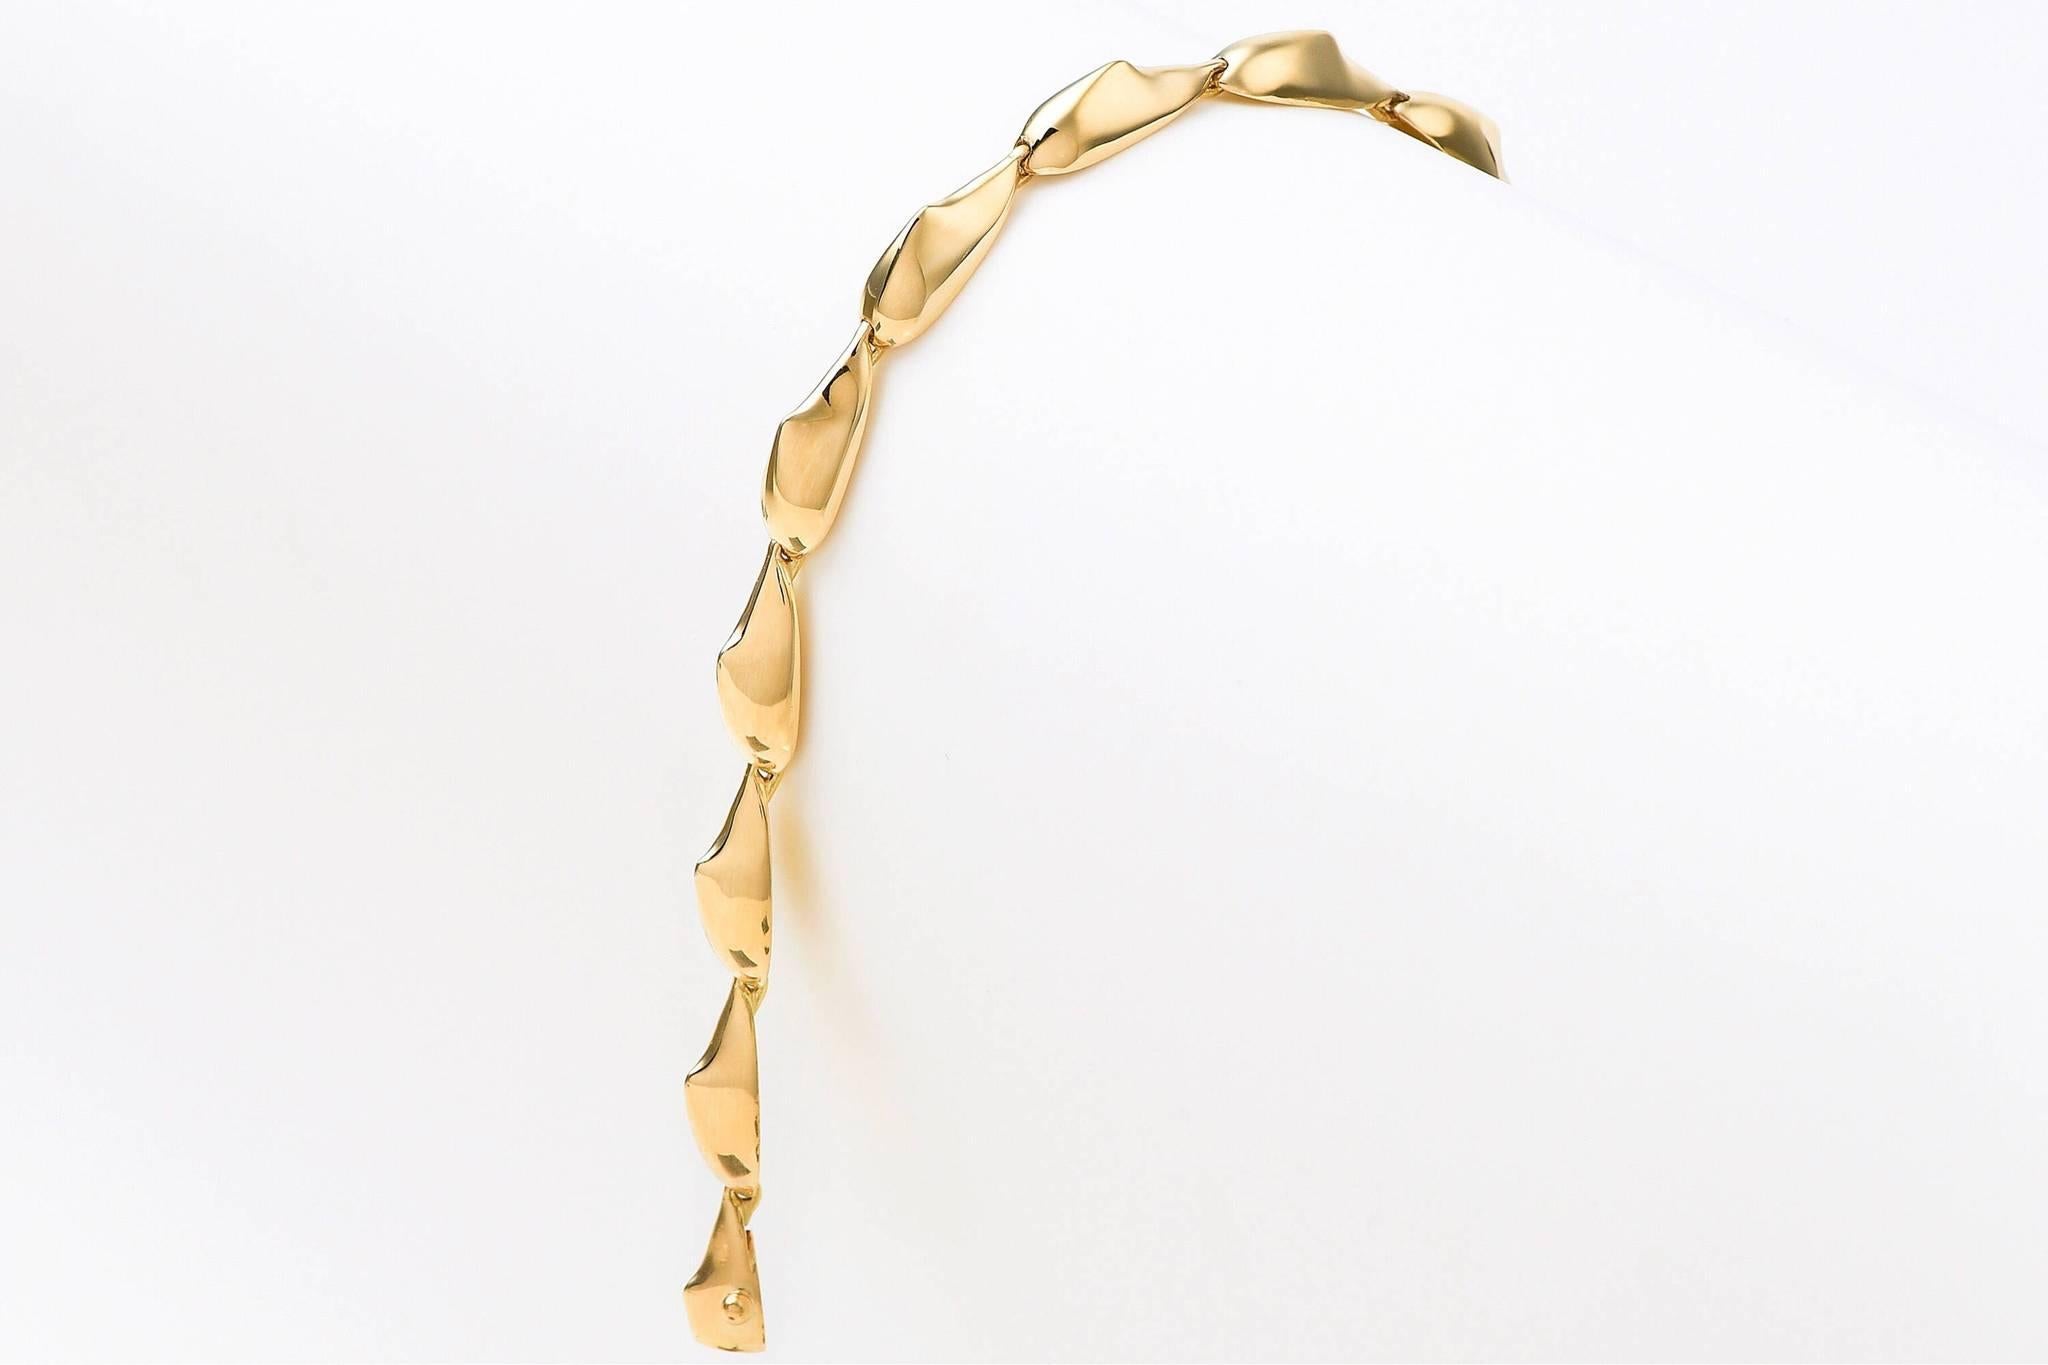 The ‘Spiked’ link bracelet is crafted in 18K yellow gold, hallmarked in Cyprus. This elegant, sculptural bracelet comes in a highly polished finish and is composed of sculptural parts, masterfully linked between them to allow a graceful movement